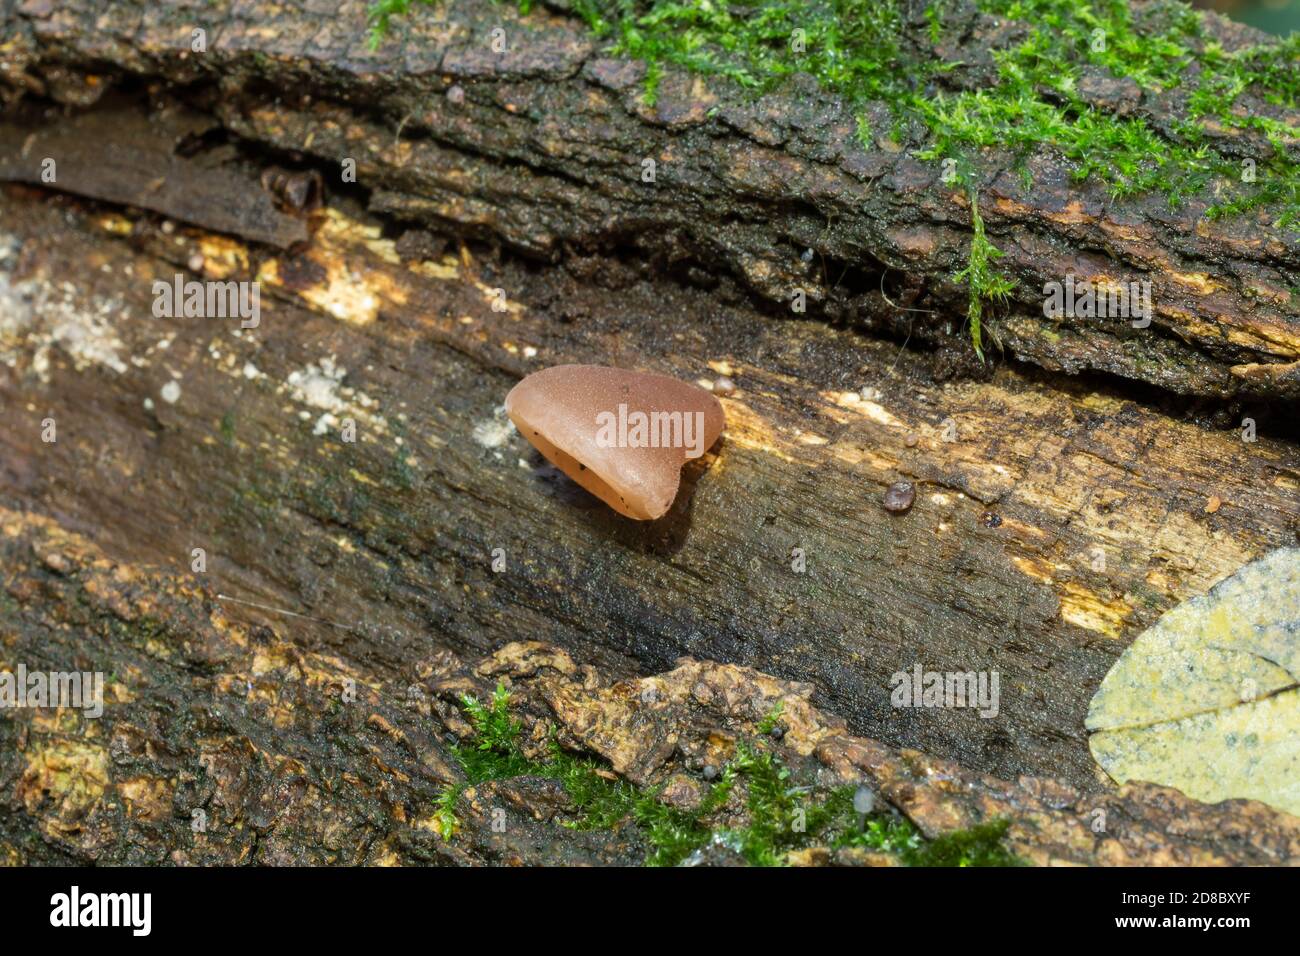 The young jelly ear or auricularia auricula growing on a fallen tree. Stock Photo